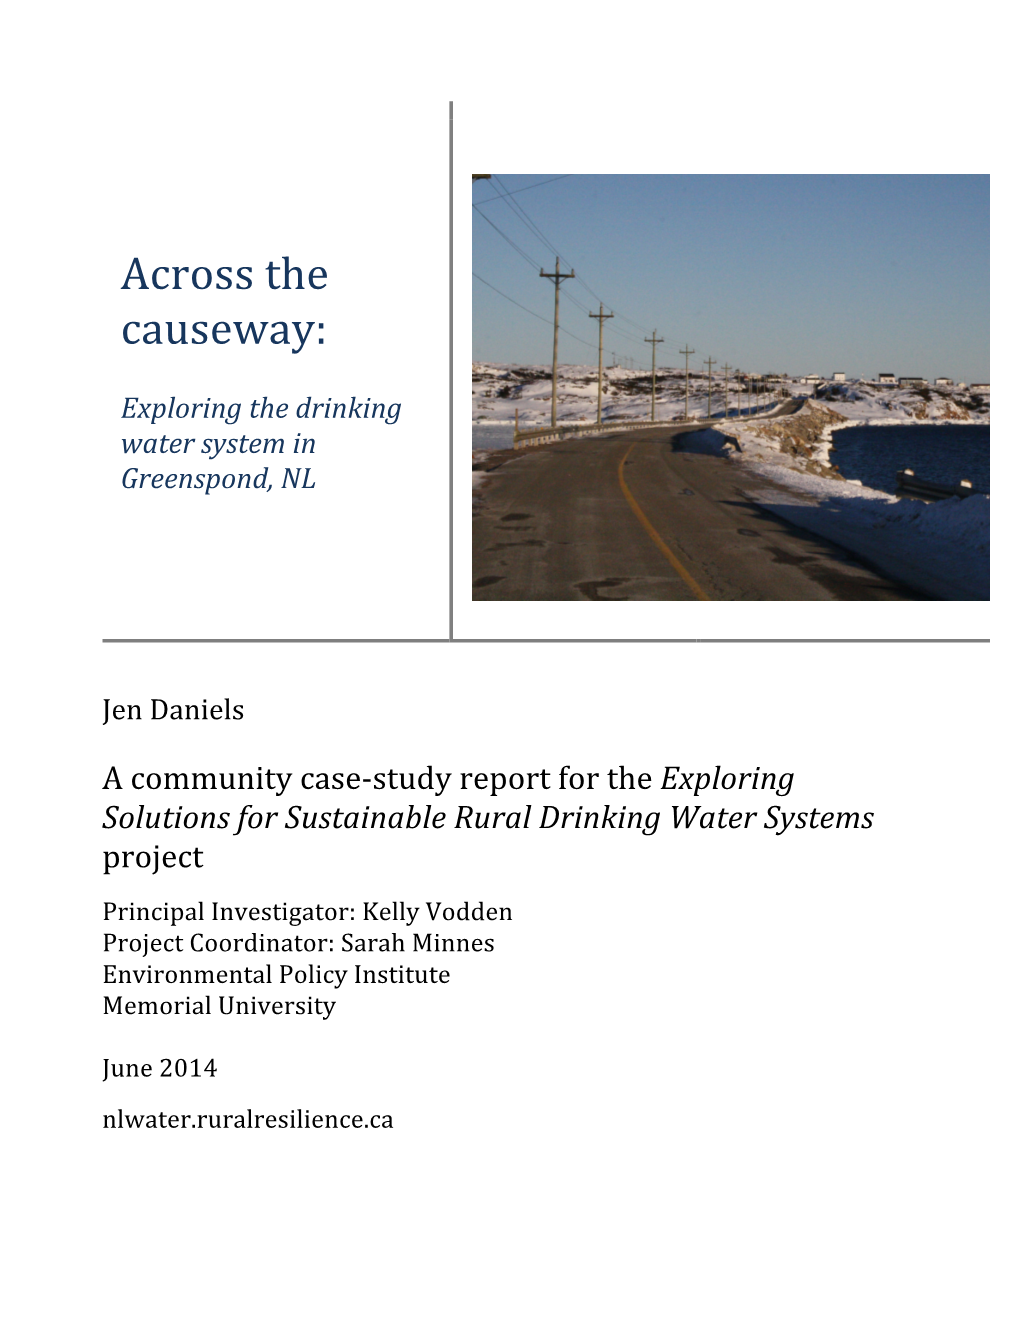 Across the Causeway: Exploring the Drinking Water System in Greenspond, NL